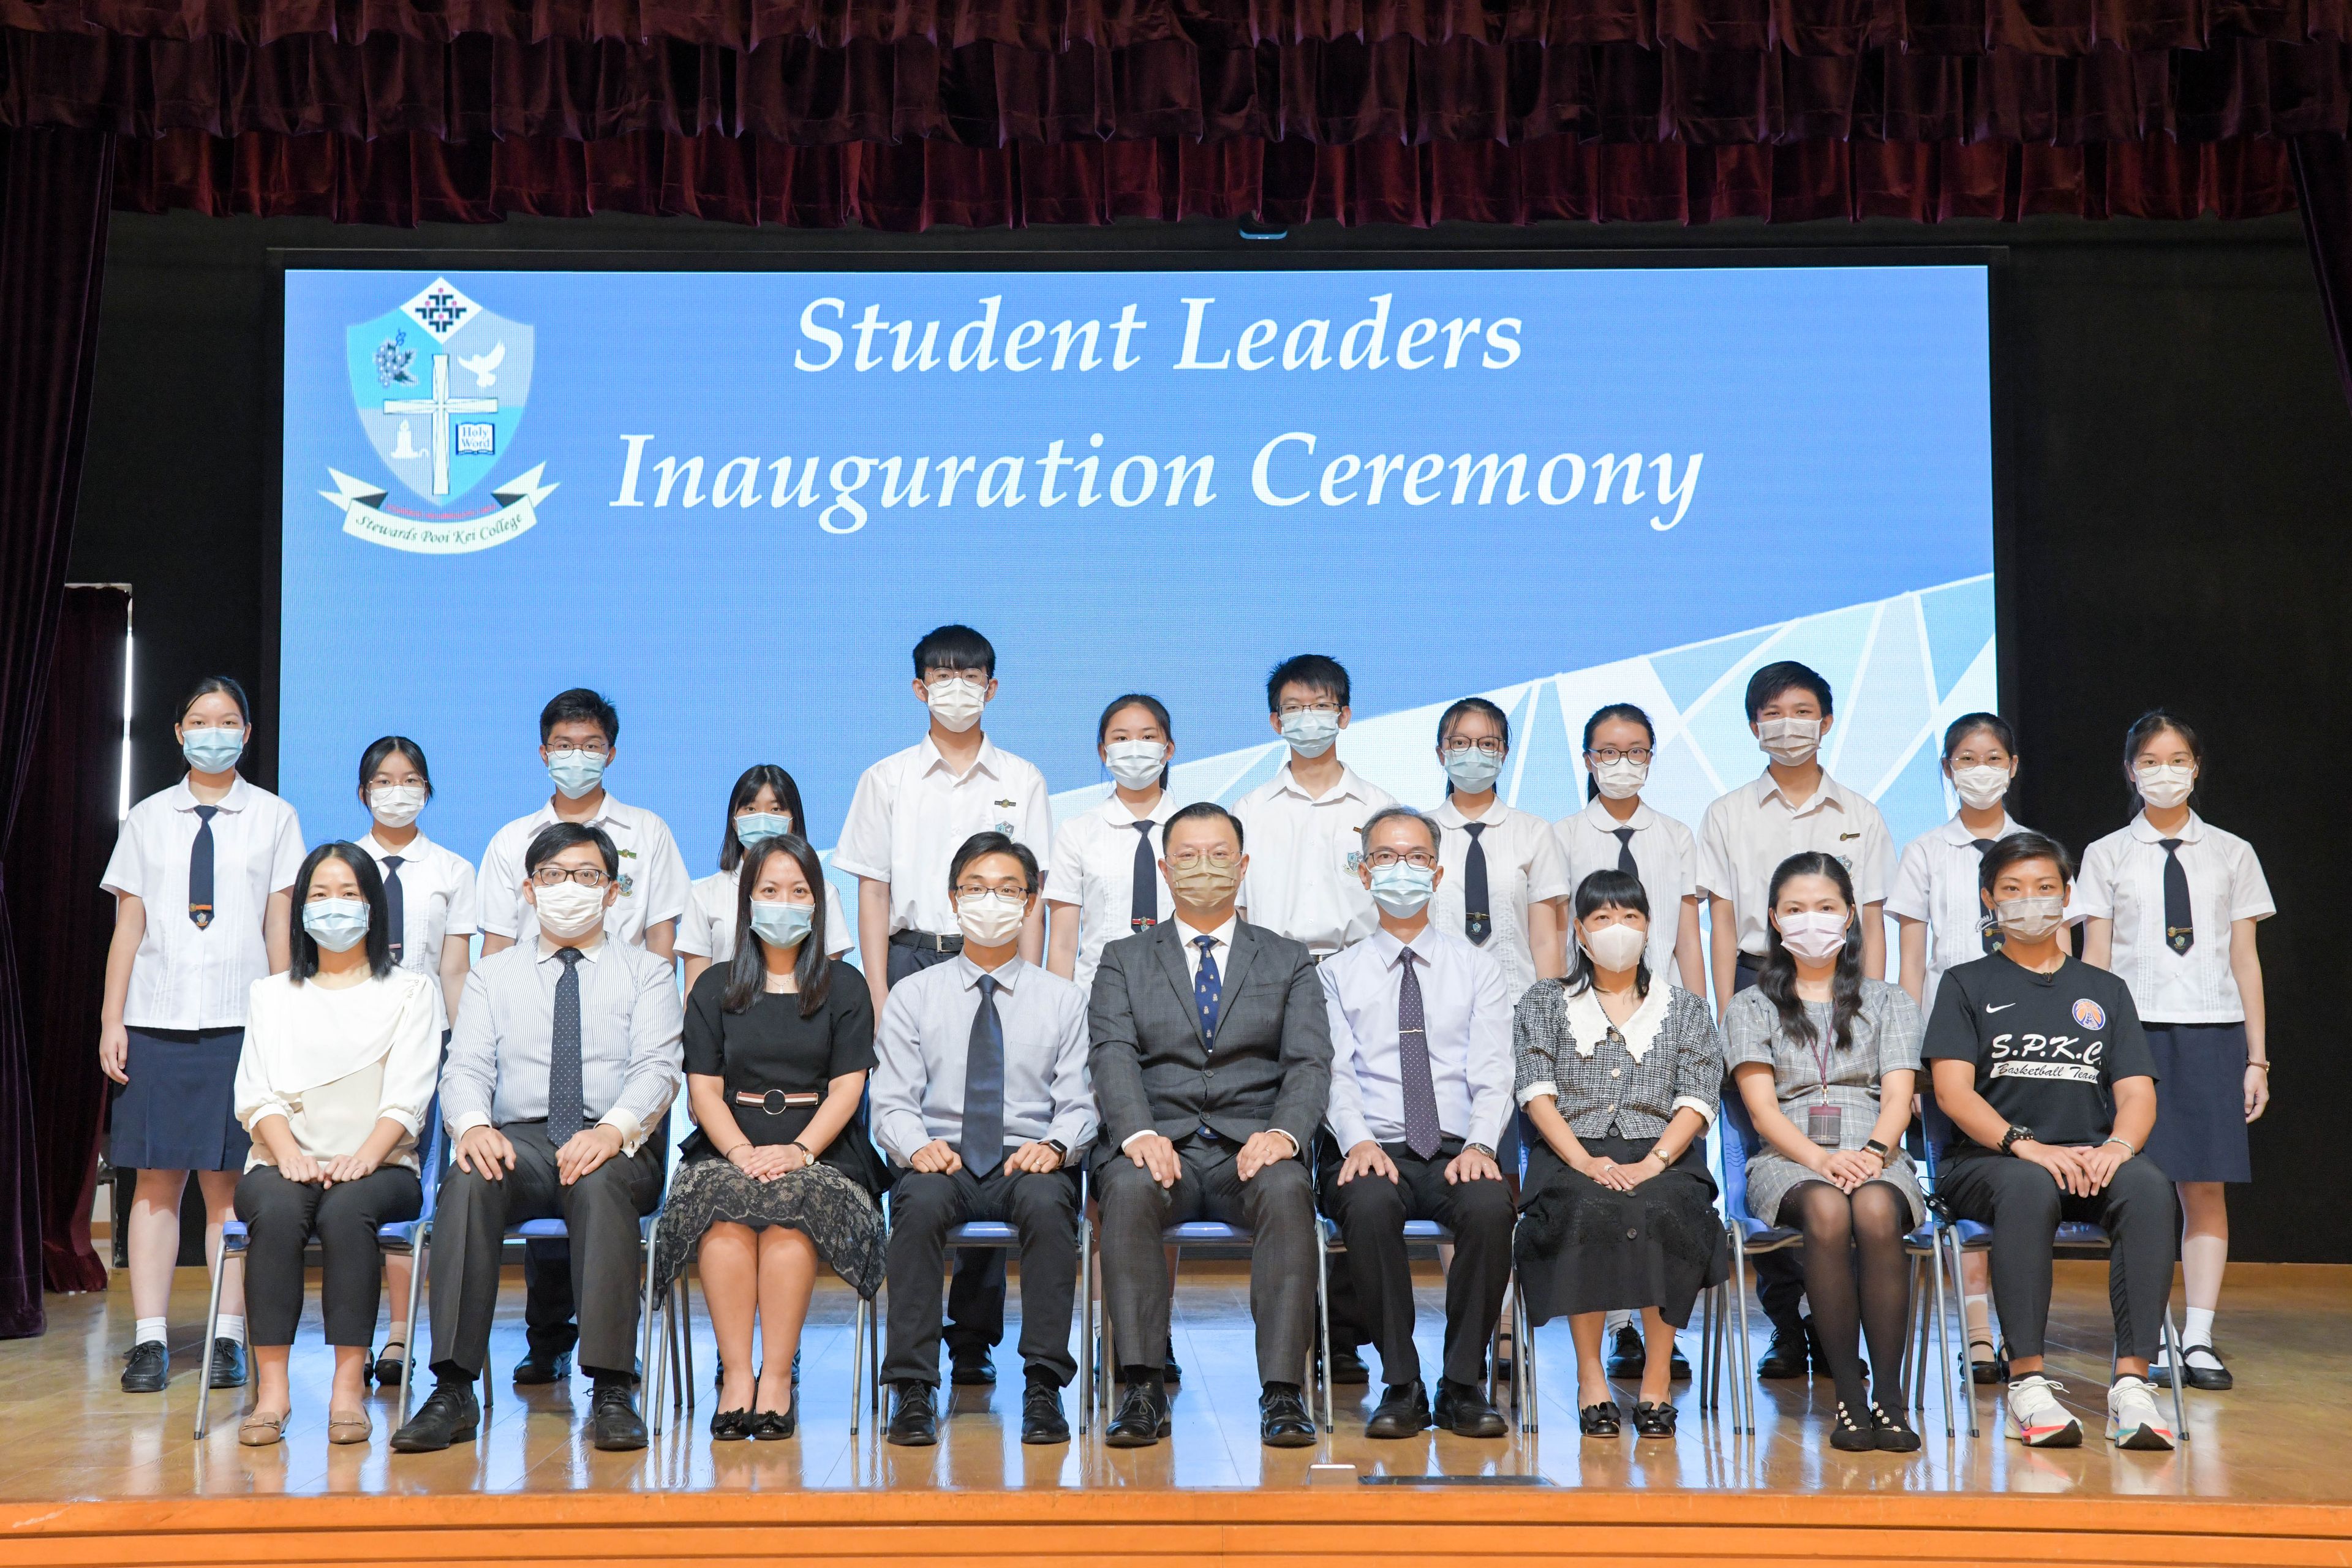 Student Leaders Inauguration Ceremony